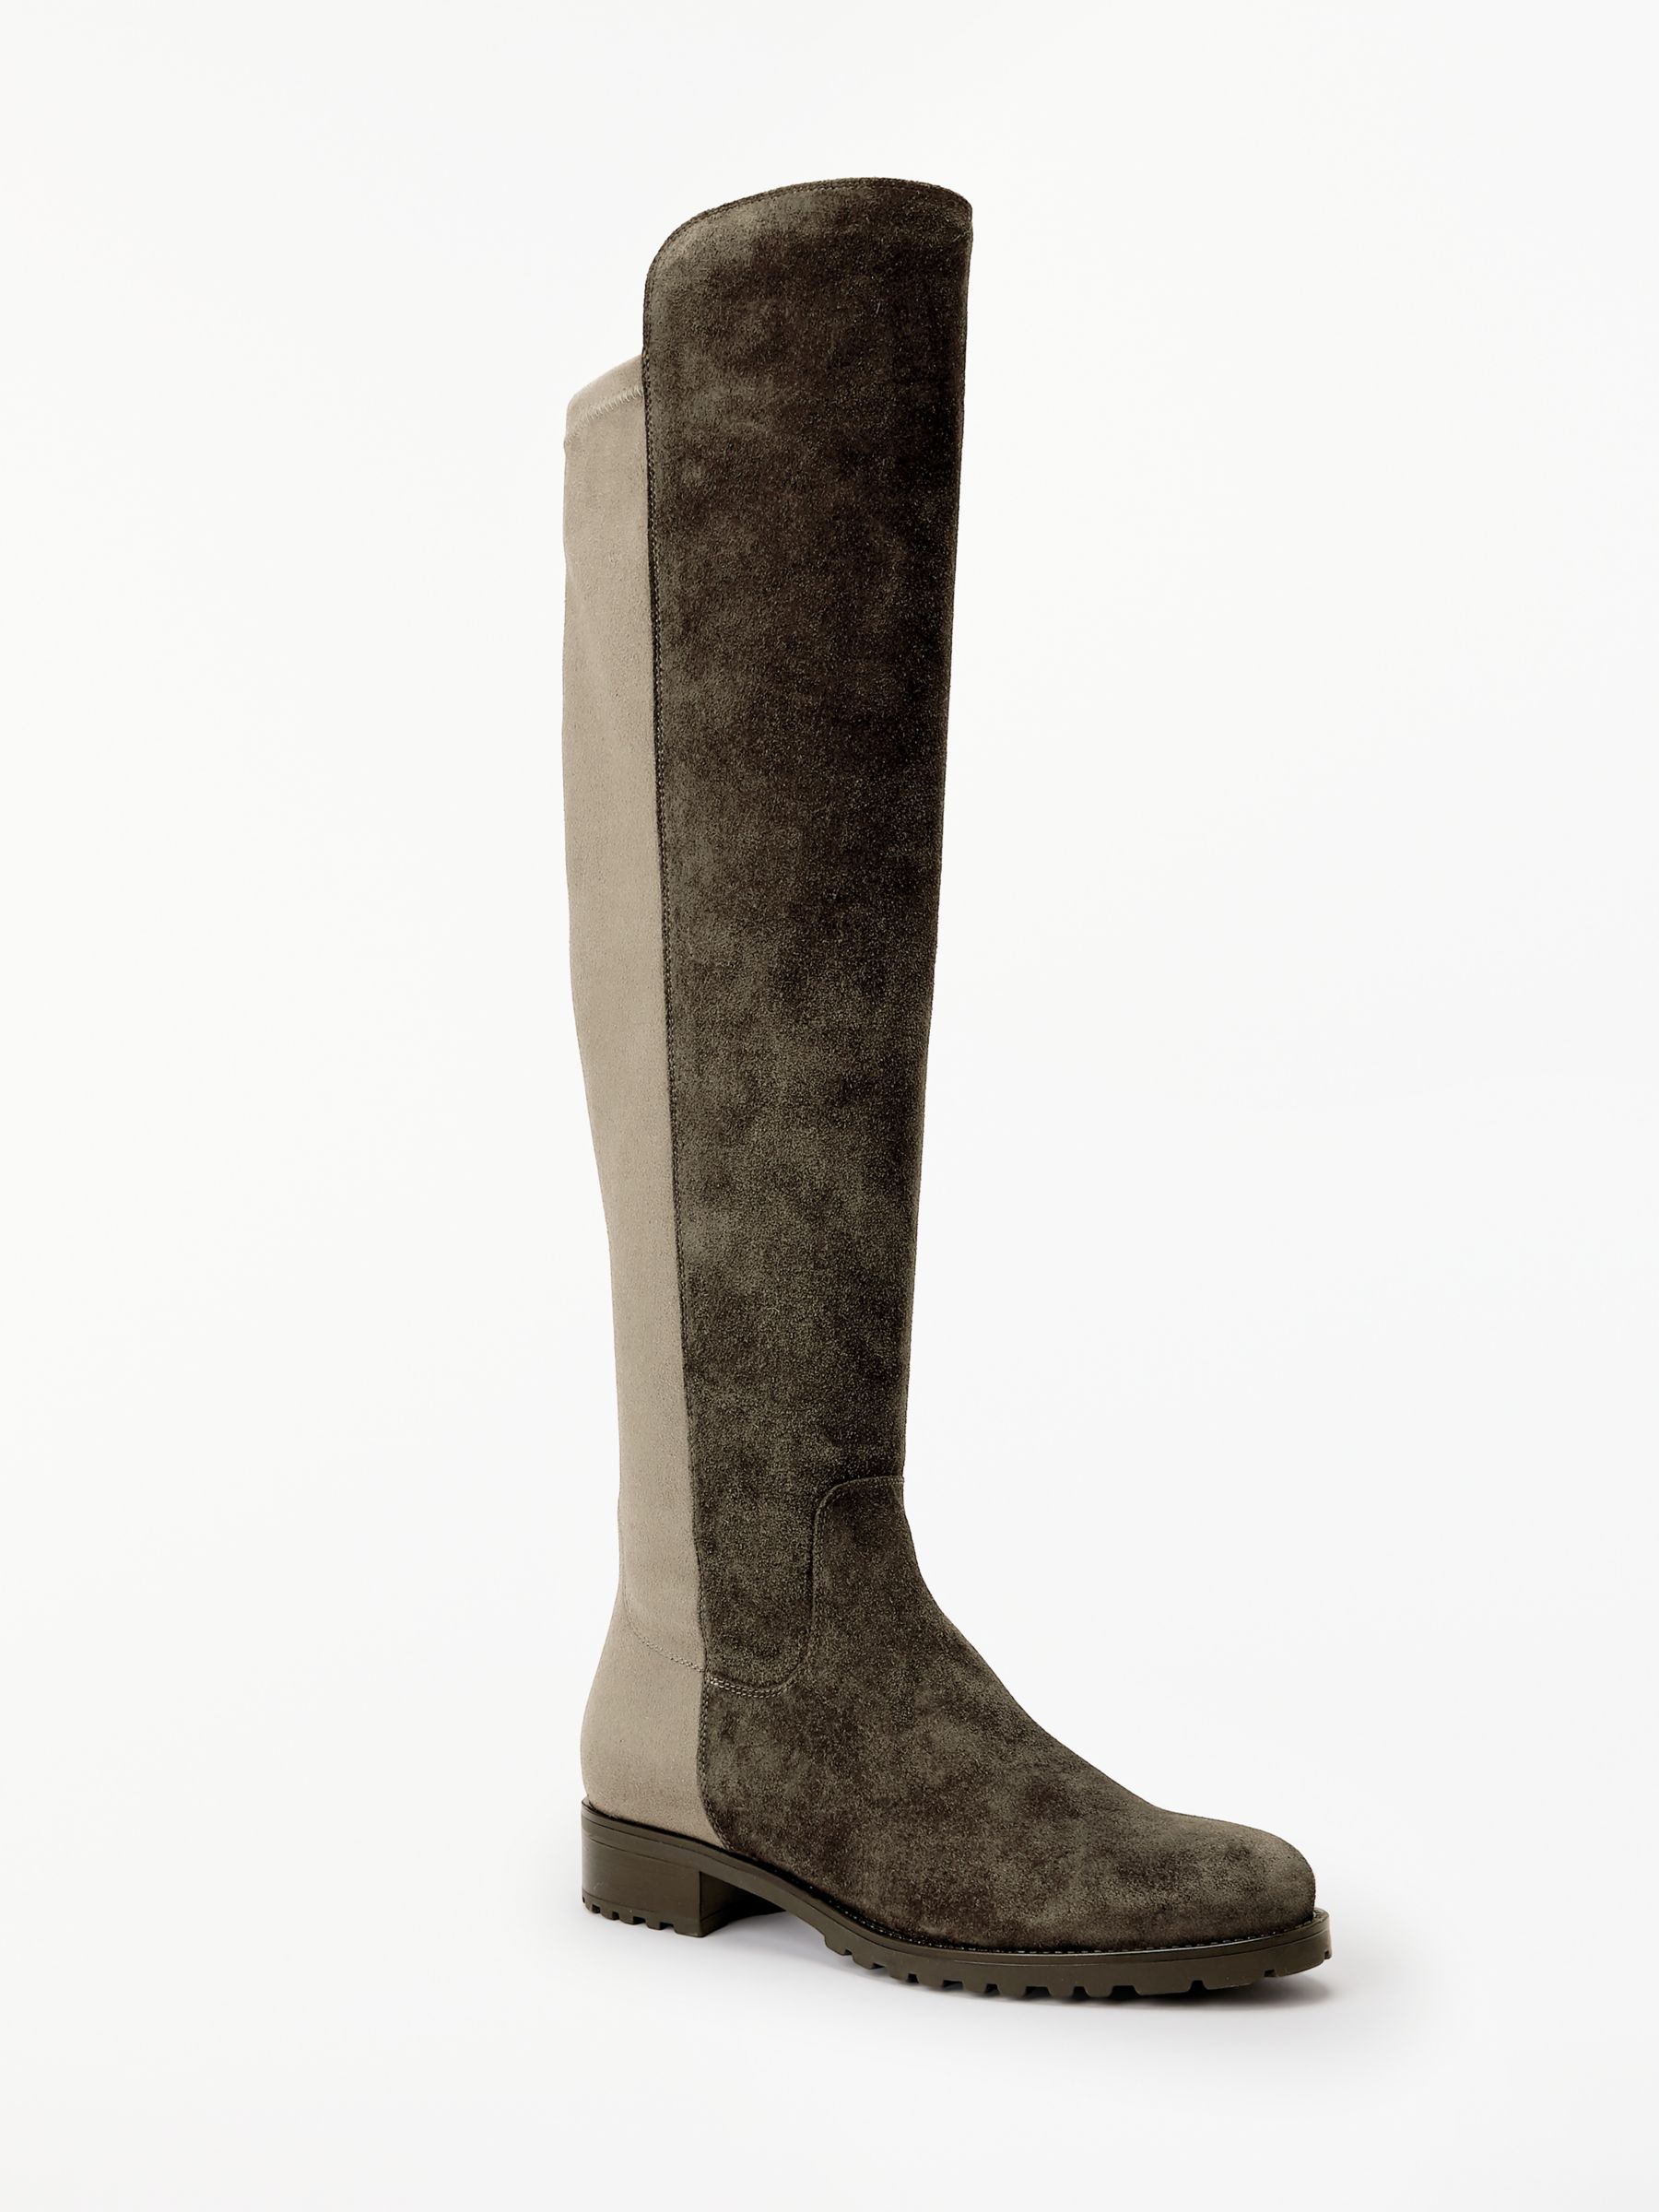 John Lewis & Partners Tilde Over The Knee Boots, Neutral Suede